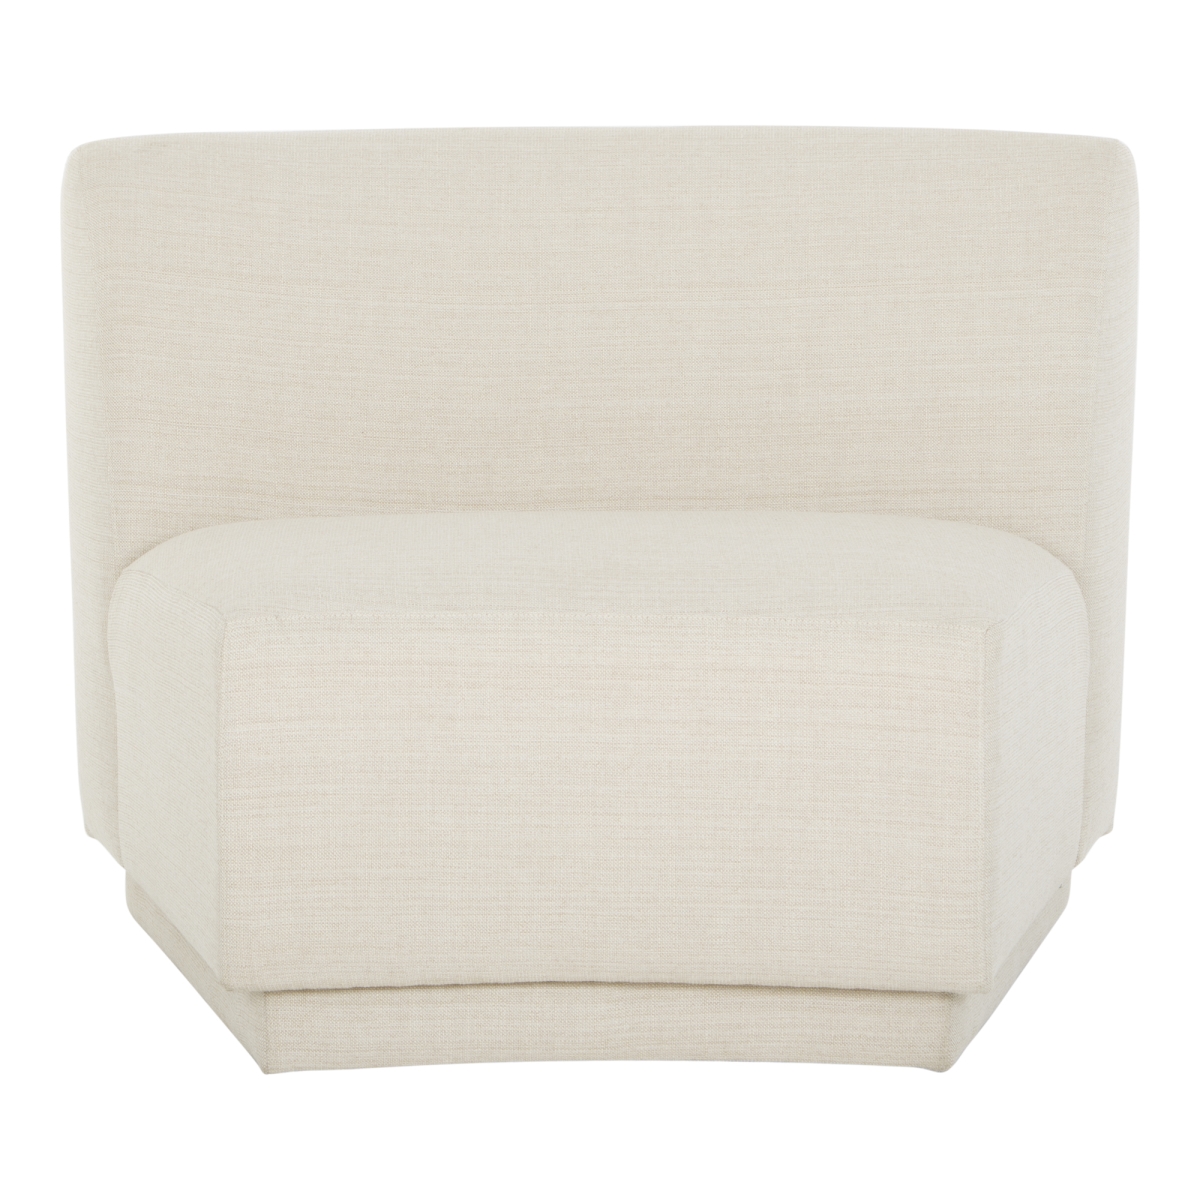 Picture of Moes Home Collection JM-1020-05 Yoon Slipper Chair, Venga 002 Cream